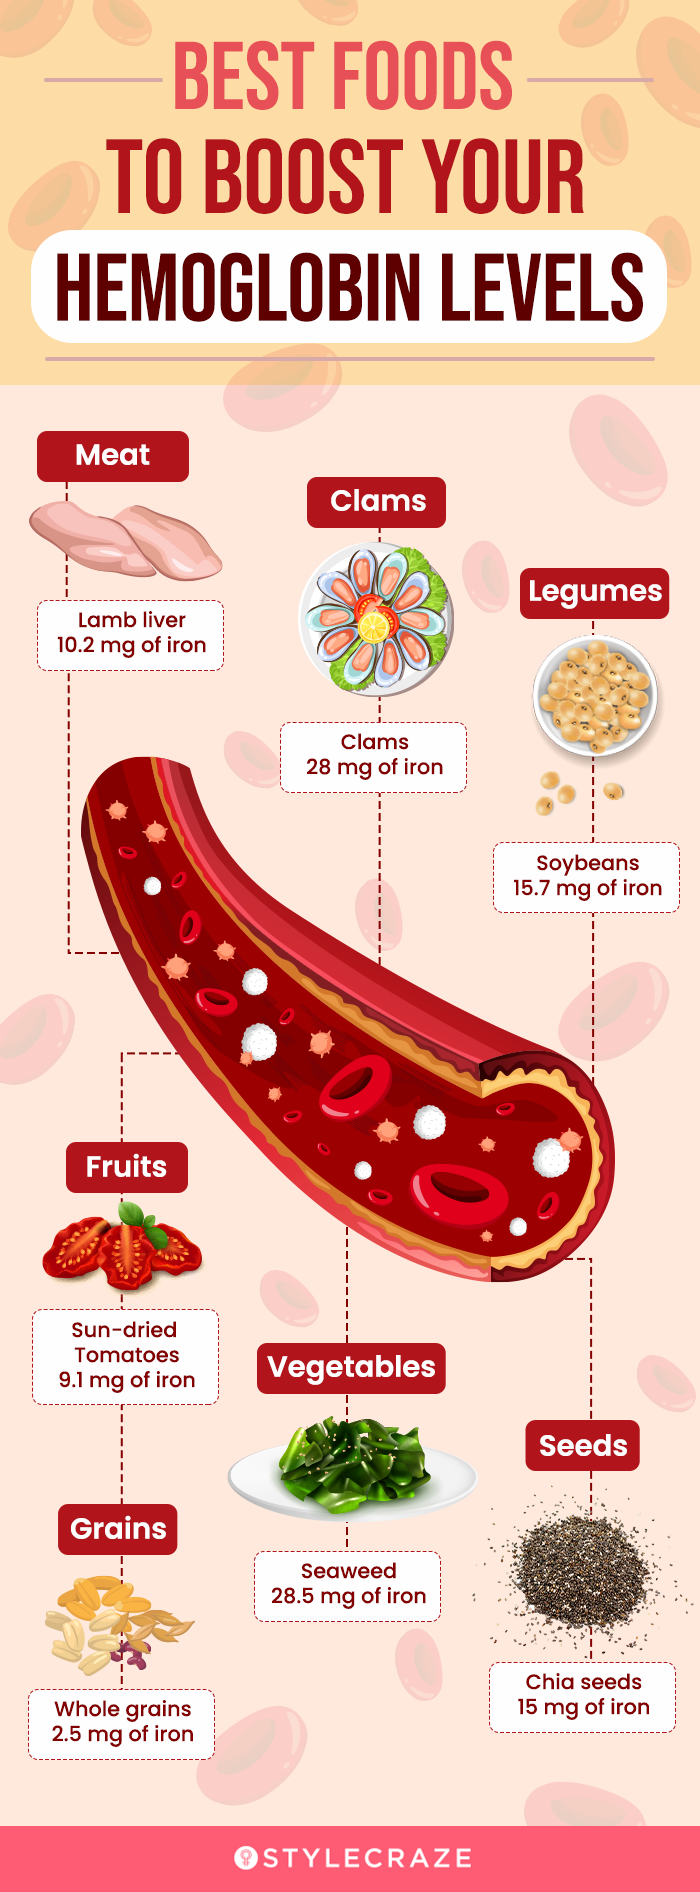 best foods to boost your hemoglobin levels [infographic]